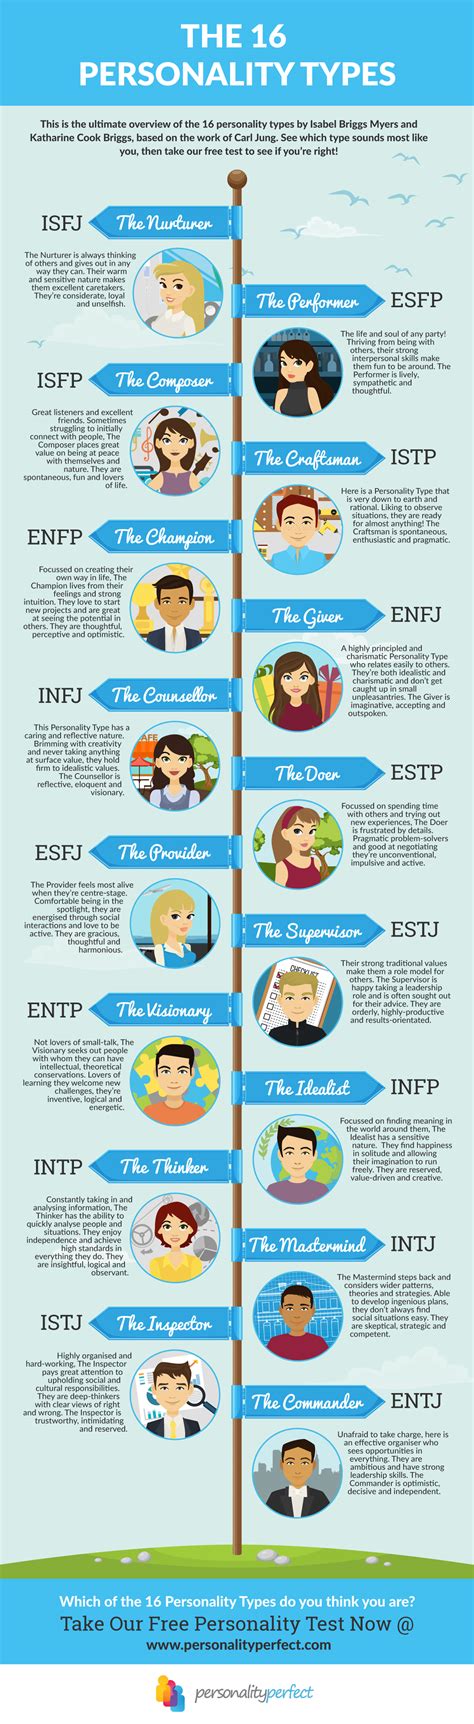 The Ultimate 16 Personality Types Overview